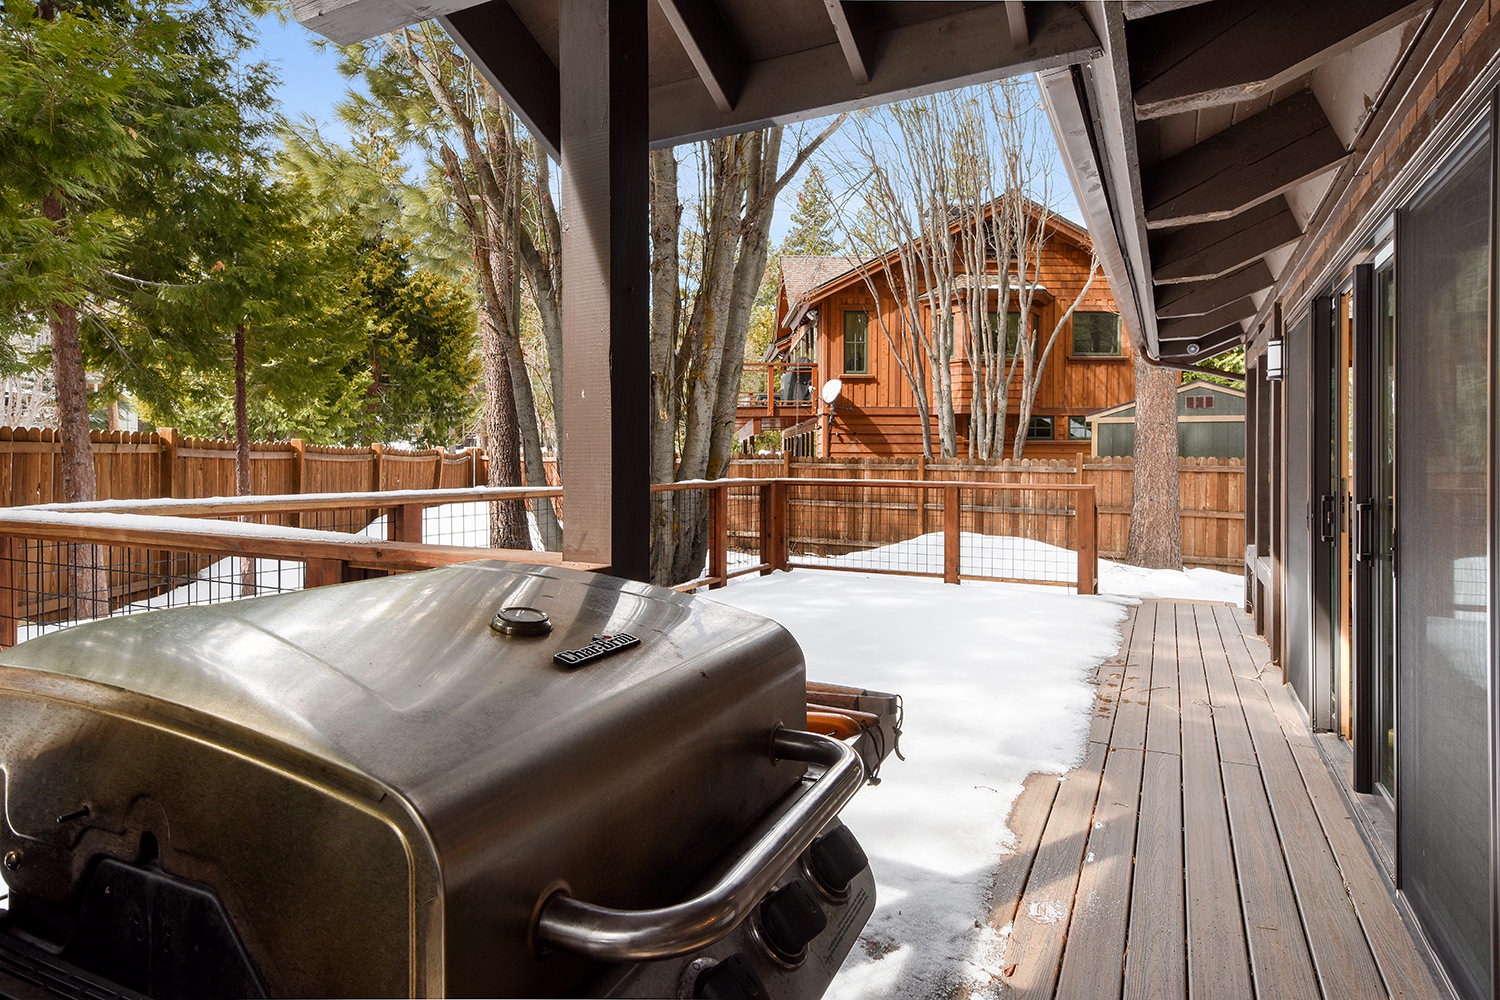 Large deck with private hot tub & grill